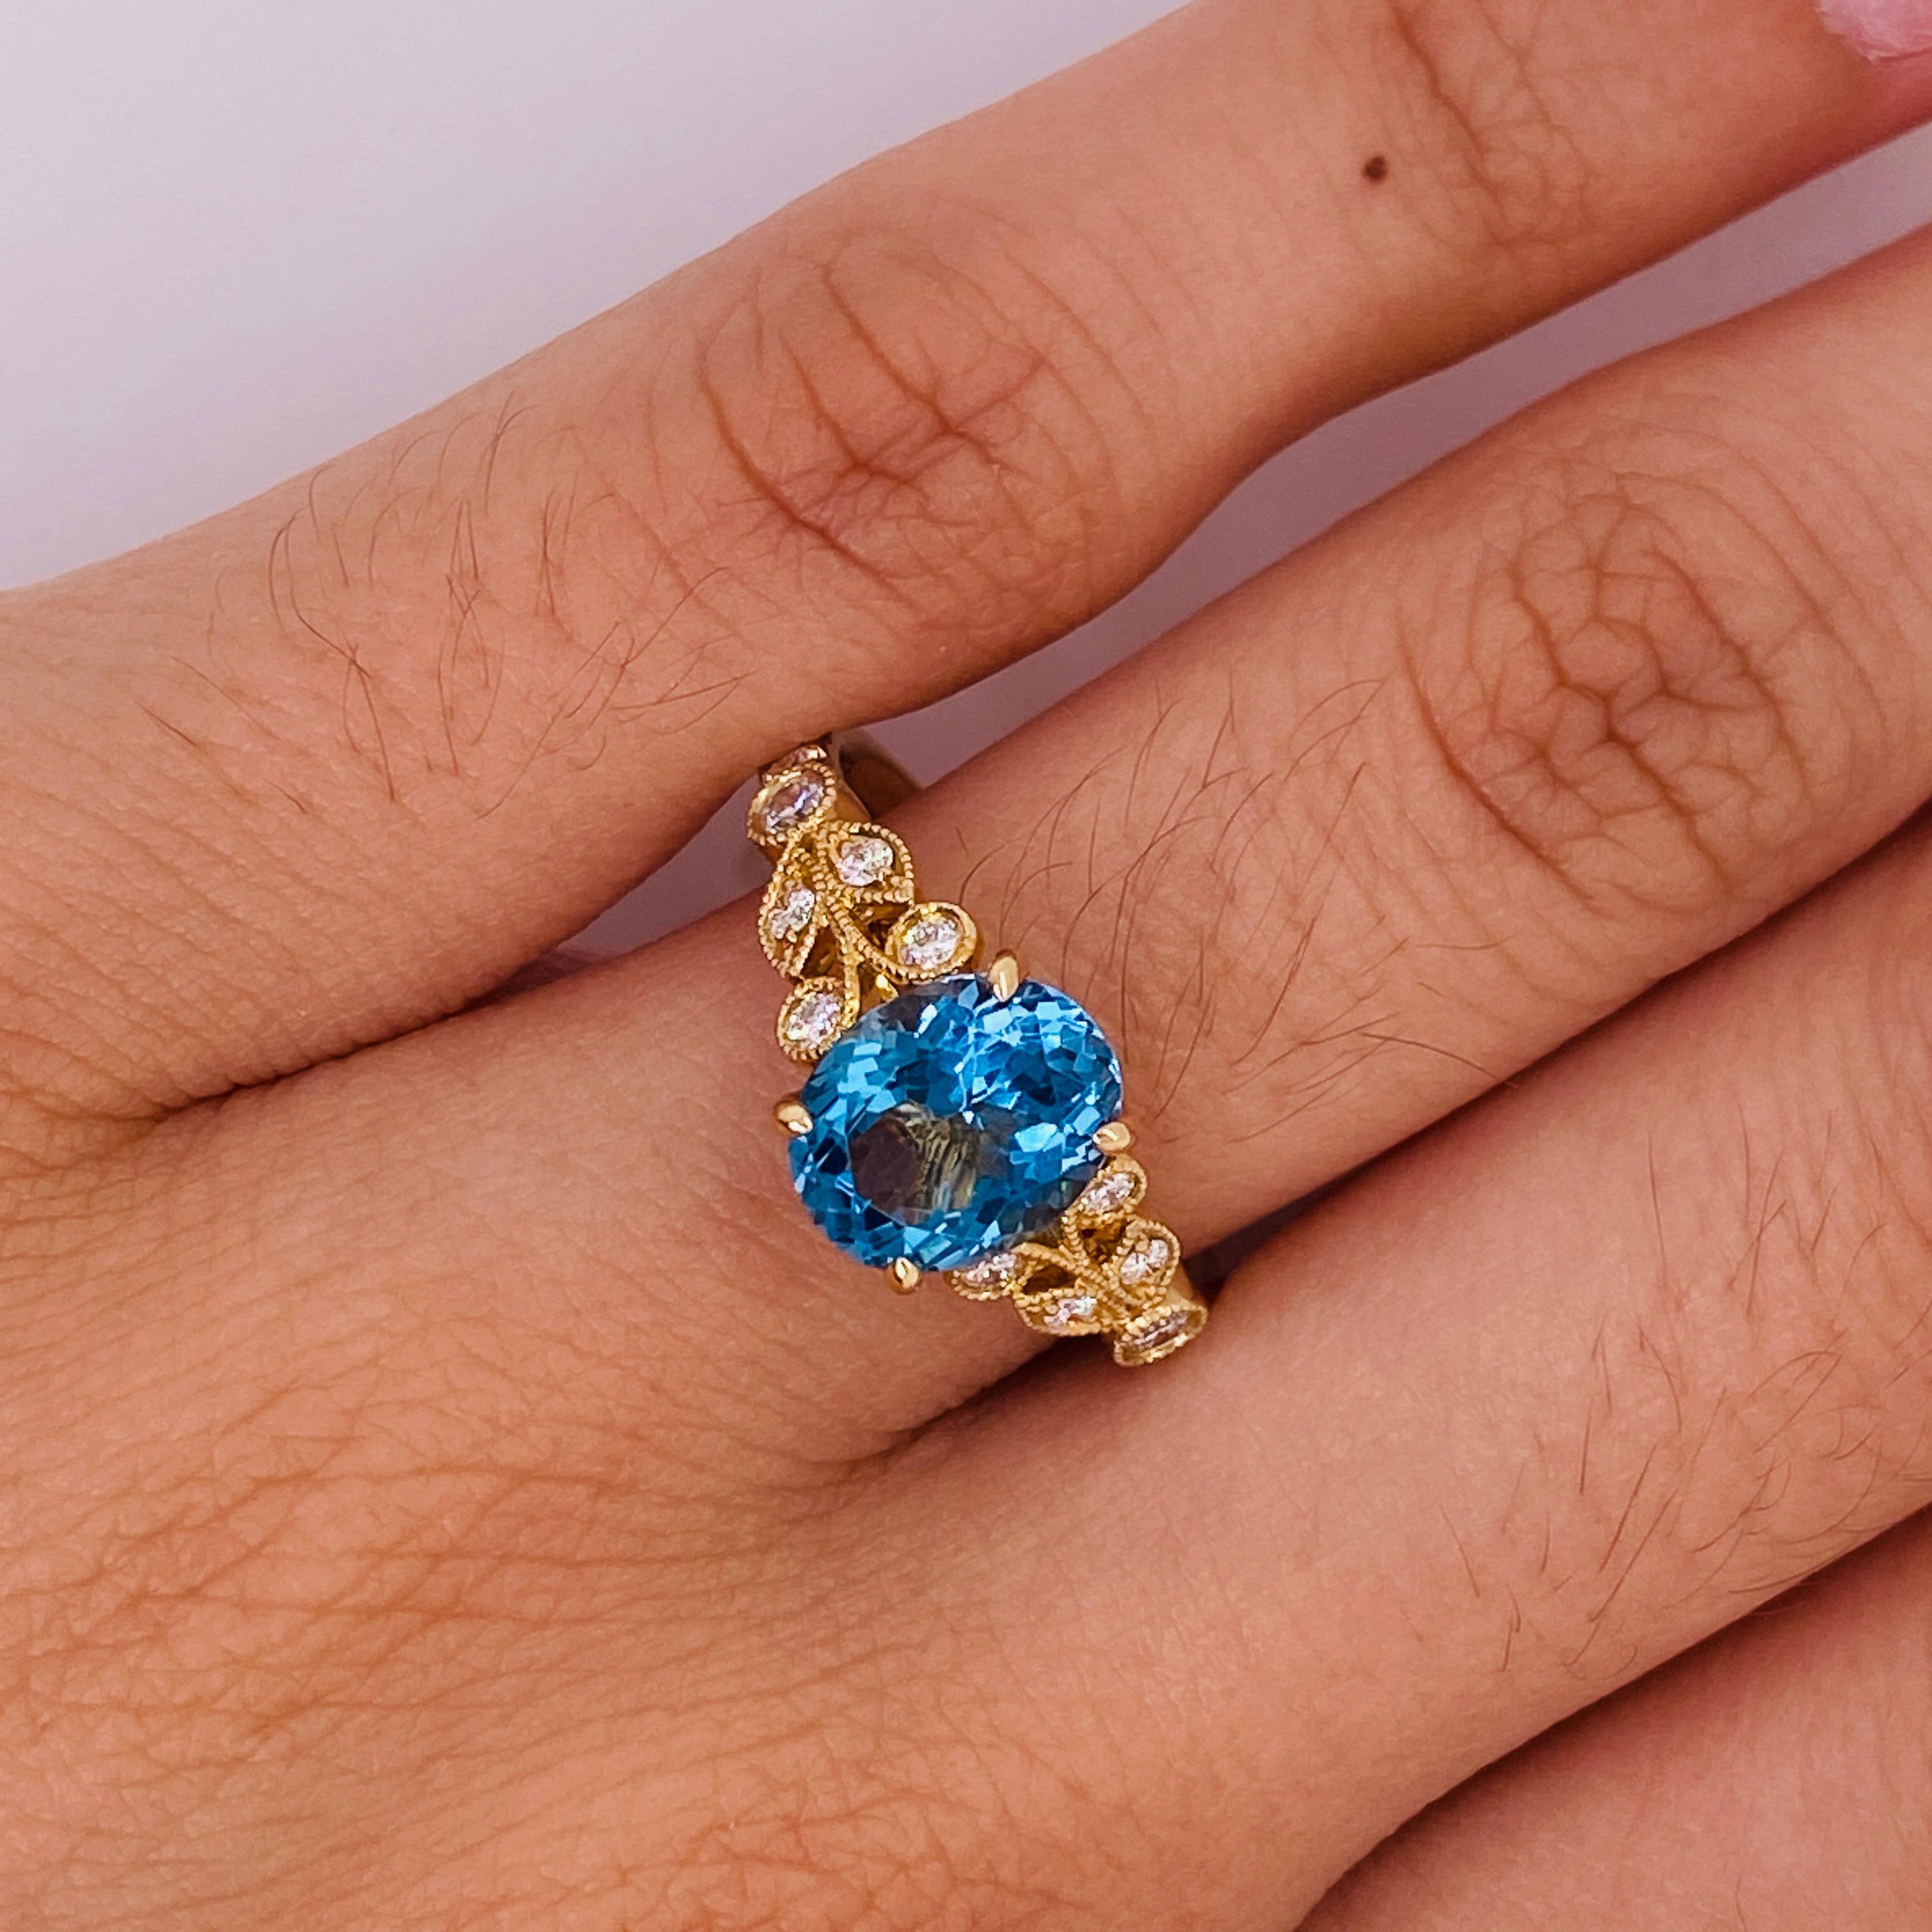 2 Carat Blue Zircon with Diamonds Nature-Inspired Ring in 14K Yellow Gold For Sale 5